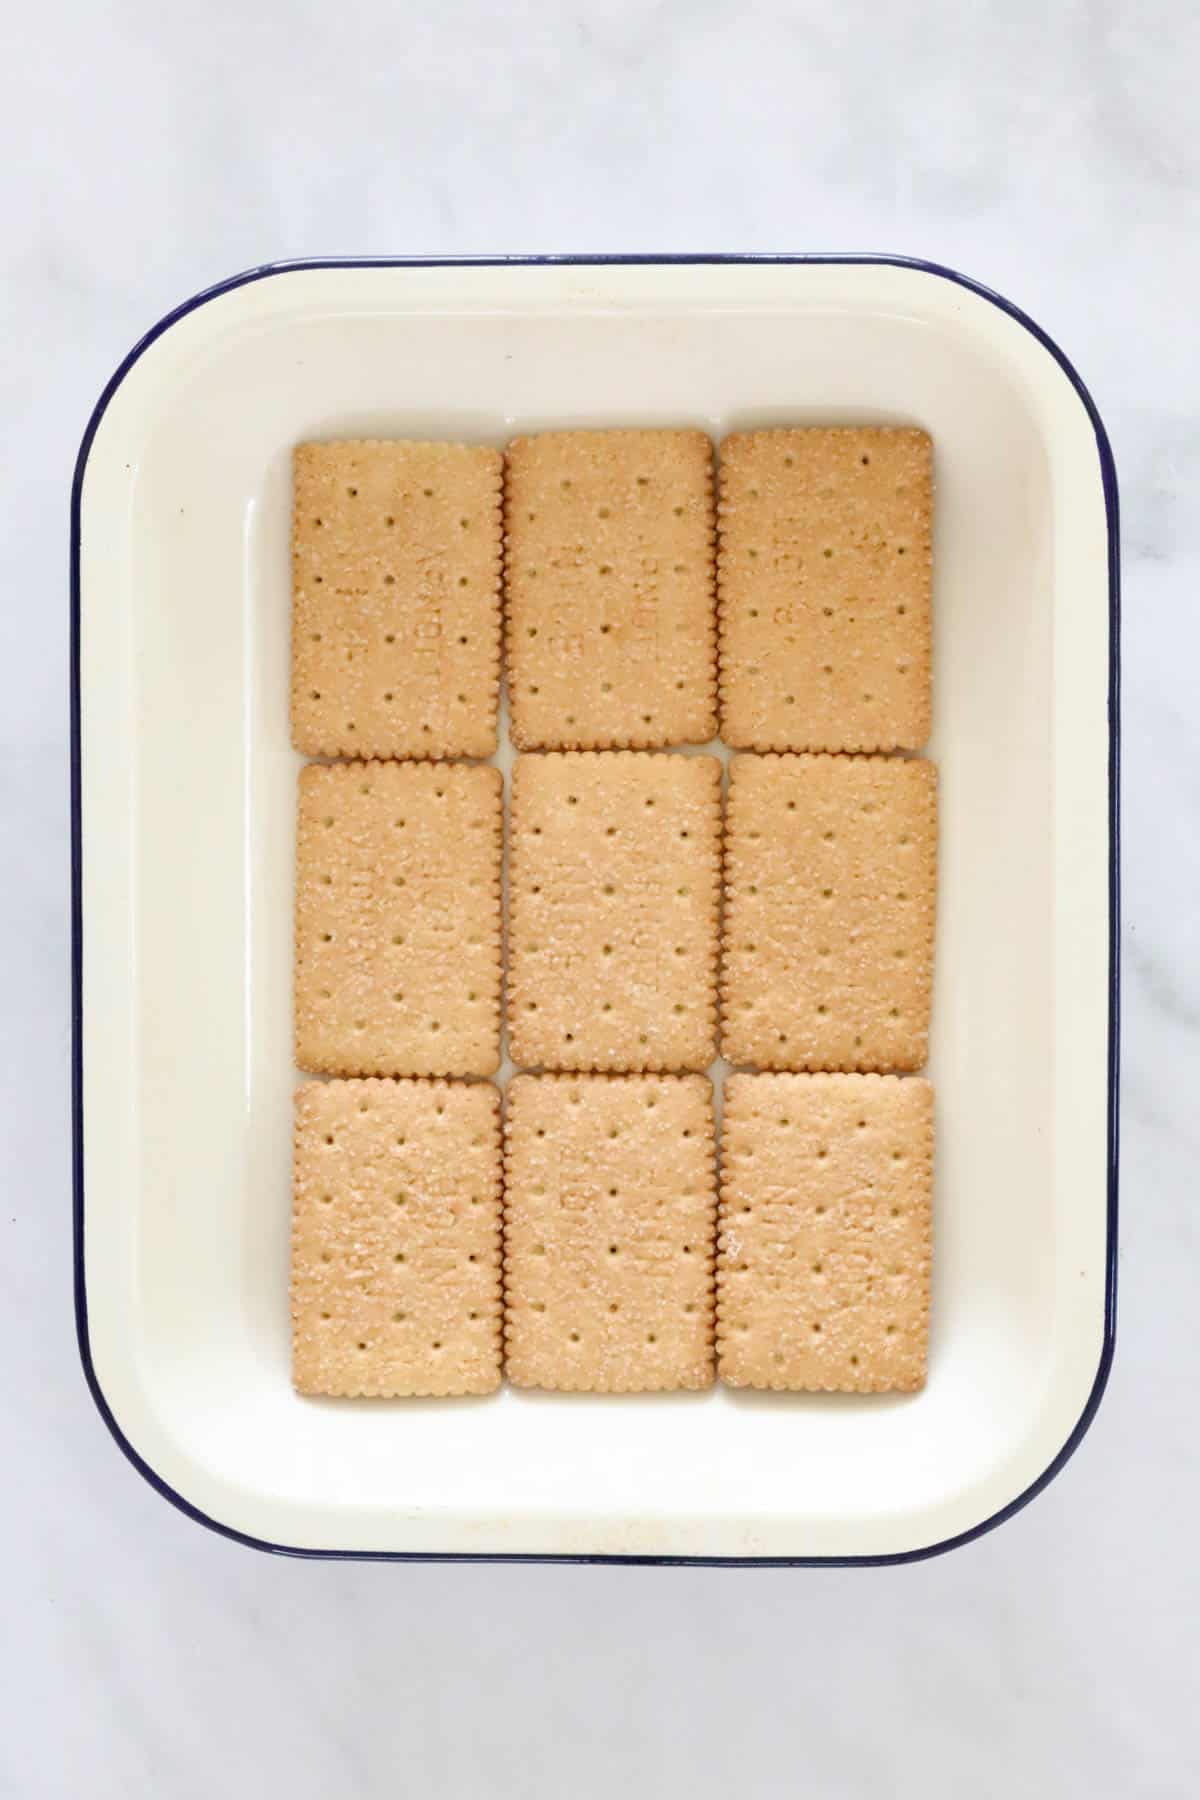 Nine biscuits laid out in the bottom of a dish.